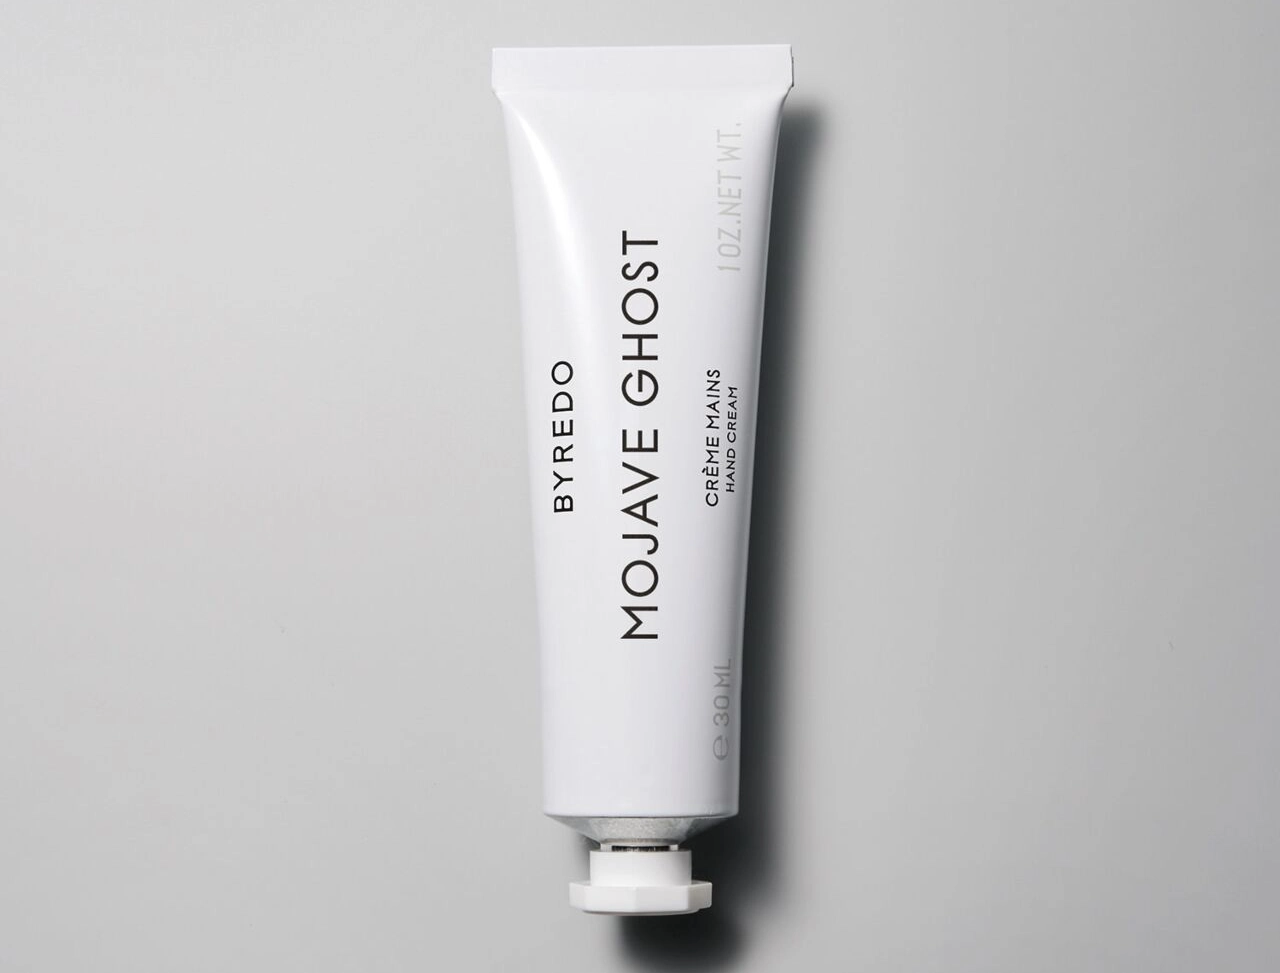 Mojave Ghost Hand Cream Review: Is It a Scam or Worth Trying?